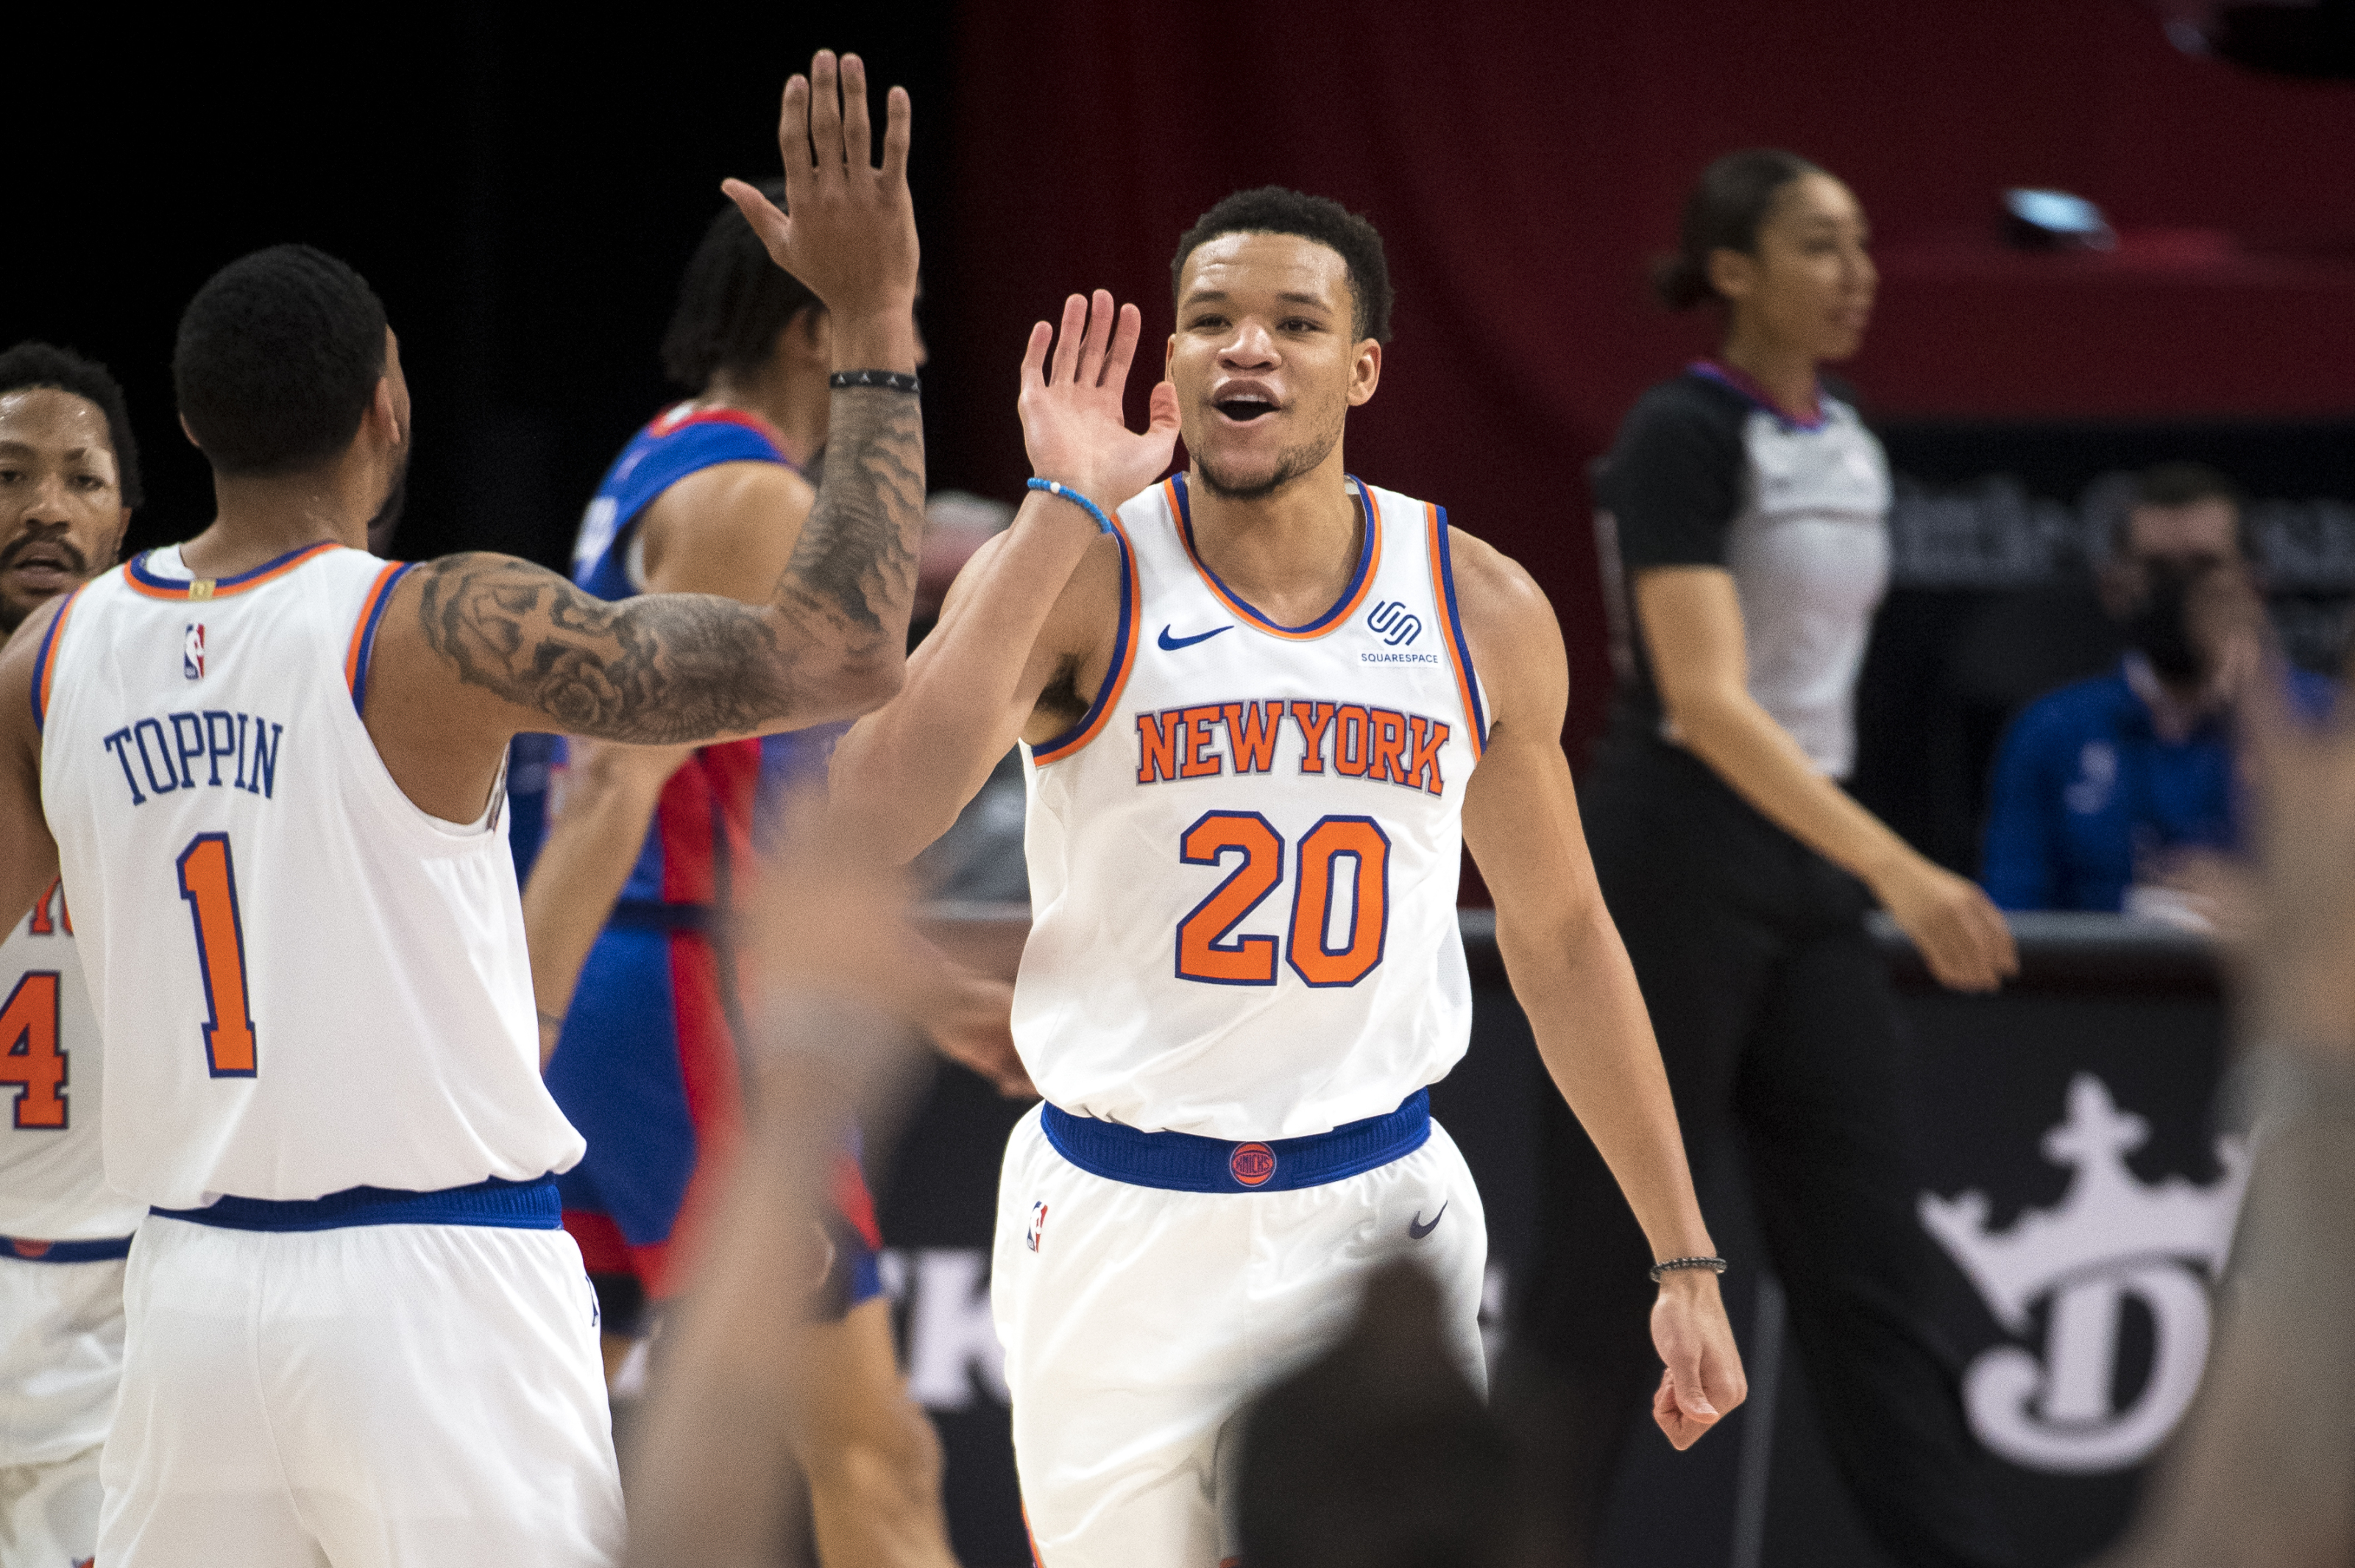 What Should the Knicks Do With Kevin Knox?